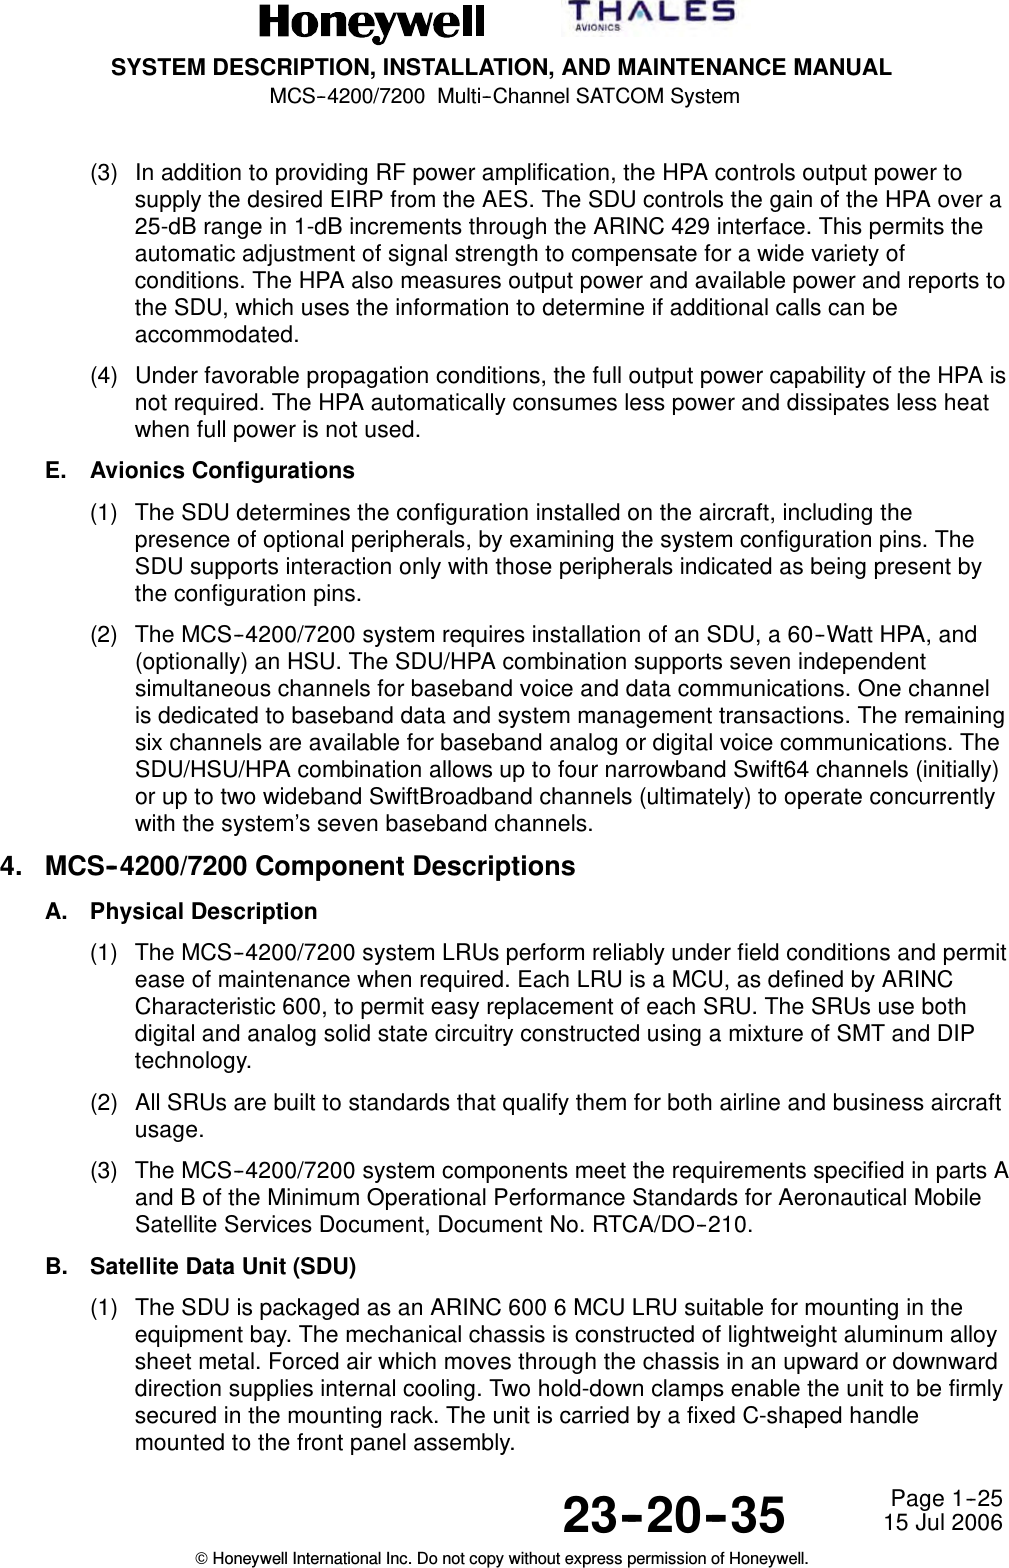 SYSTEM DESCRIPTION, INSTALLATION, AND MAINTENANCE MANUALMCS--4200/7200 Multi--Channel SATCOM System23--20--35 15 Jul 2006Honeywell International Inc. Do not copy without express permission of Honeywell.Page 1--25(3) In addition to providing RF power amplification, the HPA controls output power tosupply the desired EIRP from the AES. The SDU controls the gain of the HPA over a25-dB range in 1-dB increments through the ARINC 429 interface. This permits theautomatic adjustment of signal strength to compensate for a wide variety ofconditions. The HPA also measures output power and available power and reports tothe SDU, which uses the information to determine if additional calls can beaccommodated.(4) Under favorable propagation conditions, the full output power capability of the HPA isnot required. The HPA automatically consumes less power and dissipates less heatwhen full power is not used.E. Avionics Configurations(1) The SDU determines the configuration installed on the aircraft, including thepresence of optional peripherals, by examining the system configuration pins. TheSDU supports interaction only with those peripherals indicated as being present bythe configuration pins.(2) The MCS--4200/7200 system requires installation of an SDU, a 60--Watt HPA, and(optionally) an HSU. The SDU/HPA combination supports seven independentsimultaneous channels for baseband voice and data communications. One channelis dedicated to baseband data and system management transactions. The remainingsix channels are available for baseband analog or digital voice communications. TheSDU/HSU/HPA combination allows up to four narrowband Swift64 channels (initially)or up to two wideband SwiftBroadband channels (ultimately) to operate concurrentlywith the system’s seven baseband channels.4. MCS--4200/7200 Component DescriptionsA. Physical Description(1) The MCS--4200/7200 system LRUs perform reliably under field conditions and permitease of maintenance when required. Each LRU is a MCU, as defined by ARINCCharacteristic 600, to permit easy replacement of each SRU. The SRUs use bothdigital and analog solid state circuitry constructed using a mixture of SMT and DIPtechnology.(2) All SRUs are built to standards that qualify them for both airline and business aircraftusage.(3) The MCS--4200/7200 system components meet the requirements specified in parts Aand B of the Minimum Operational Performance Standards for Aeronautical MobileSatellite Services Document, Document No. RTCA/DO--210.B. Satellite Data Unit (SDU)(1) The SDU is packaged as an ARINC 600 6 MCU LRU suitable for mounting in theequipment bay. The mechanical chassis is constructed of lightweight aluminum alloysheet metal. Forced air which moves through the chassis in an upward or downwarddirection supplies internal cooling. Two hold-down clamps enable the unit to be firmlysecured in the mounting rack. The unit is carried by a fixed C-shaped handlemounted to the front panel assembly.